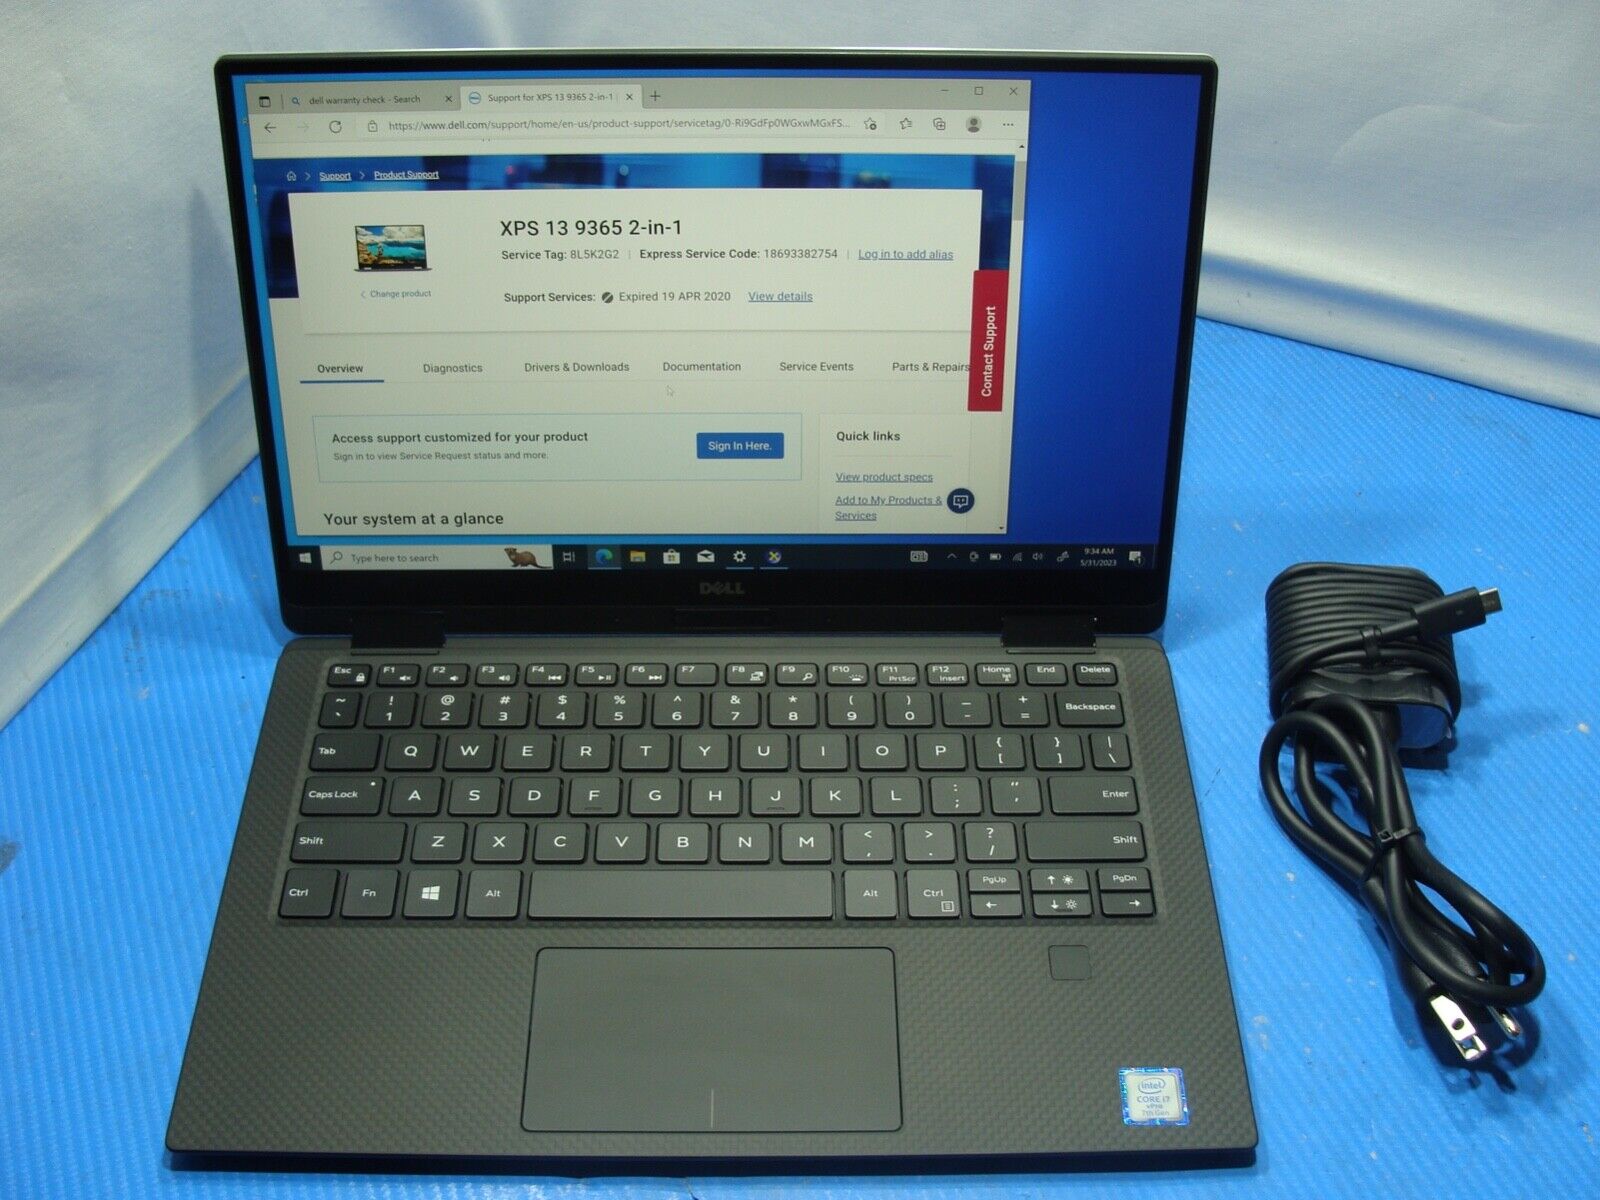 OMG @ Dell XPS 13 9365 2-in-1 laptop 13.3